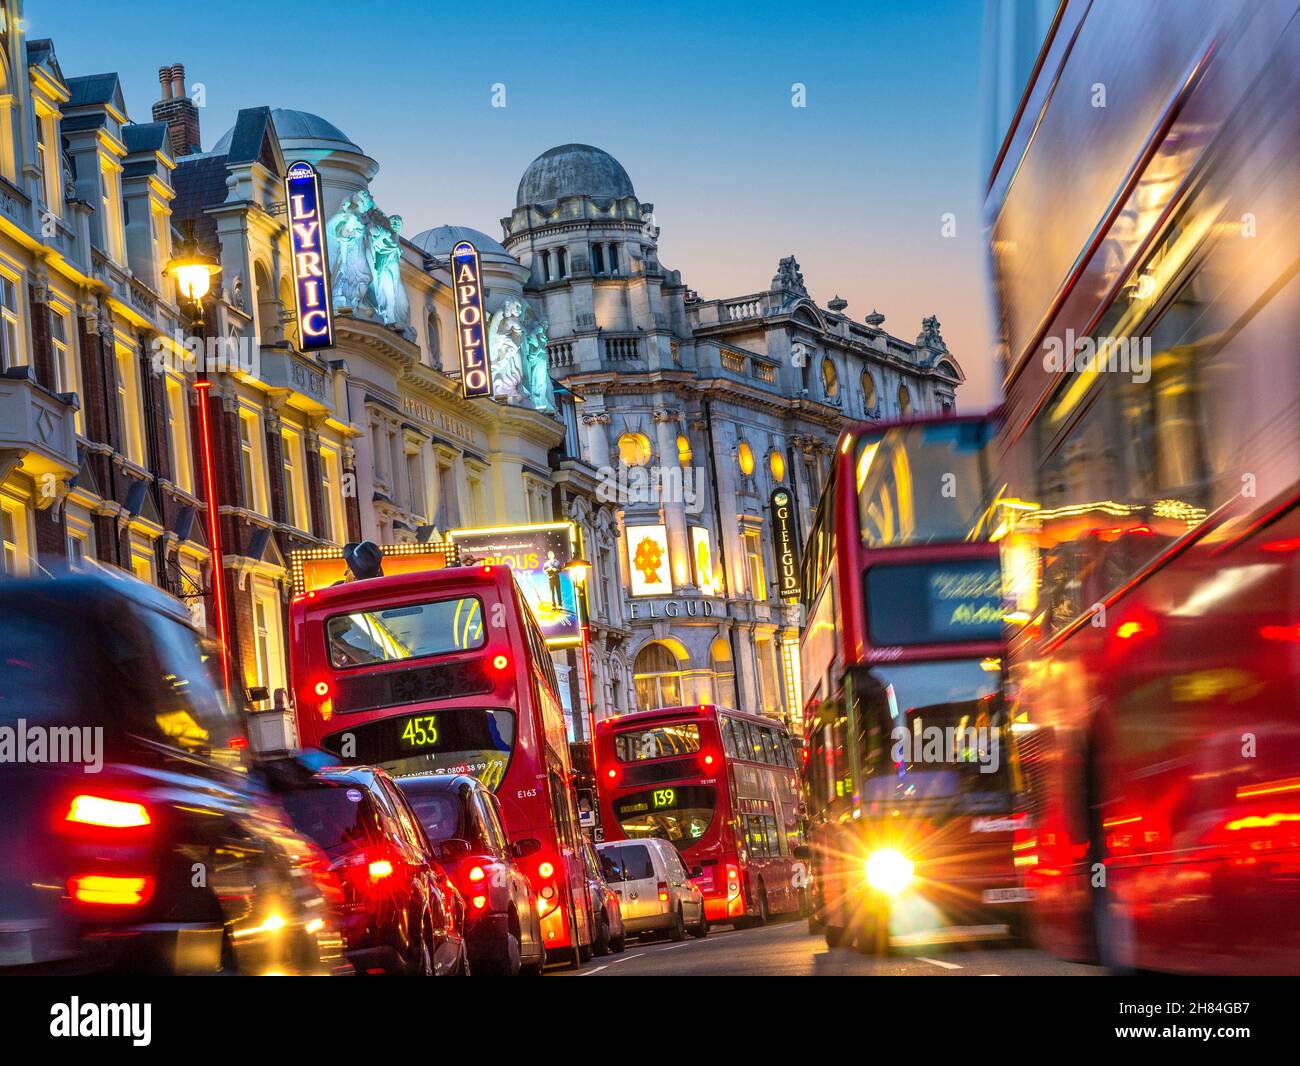 SHAFTESBURY AVENUE GRIDLOCK NIGHT LONDON TRAFFIC BUSES CARS VANS  ULEZ POLLUTION  Theatreland West End Lyric Apollo theatres busy heavy pollution diesel fumes with red buses taxis and private vehicles in Shaftesbury Avenue at dusk West End London UK Stock Photo